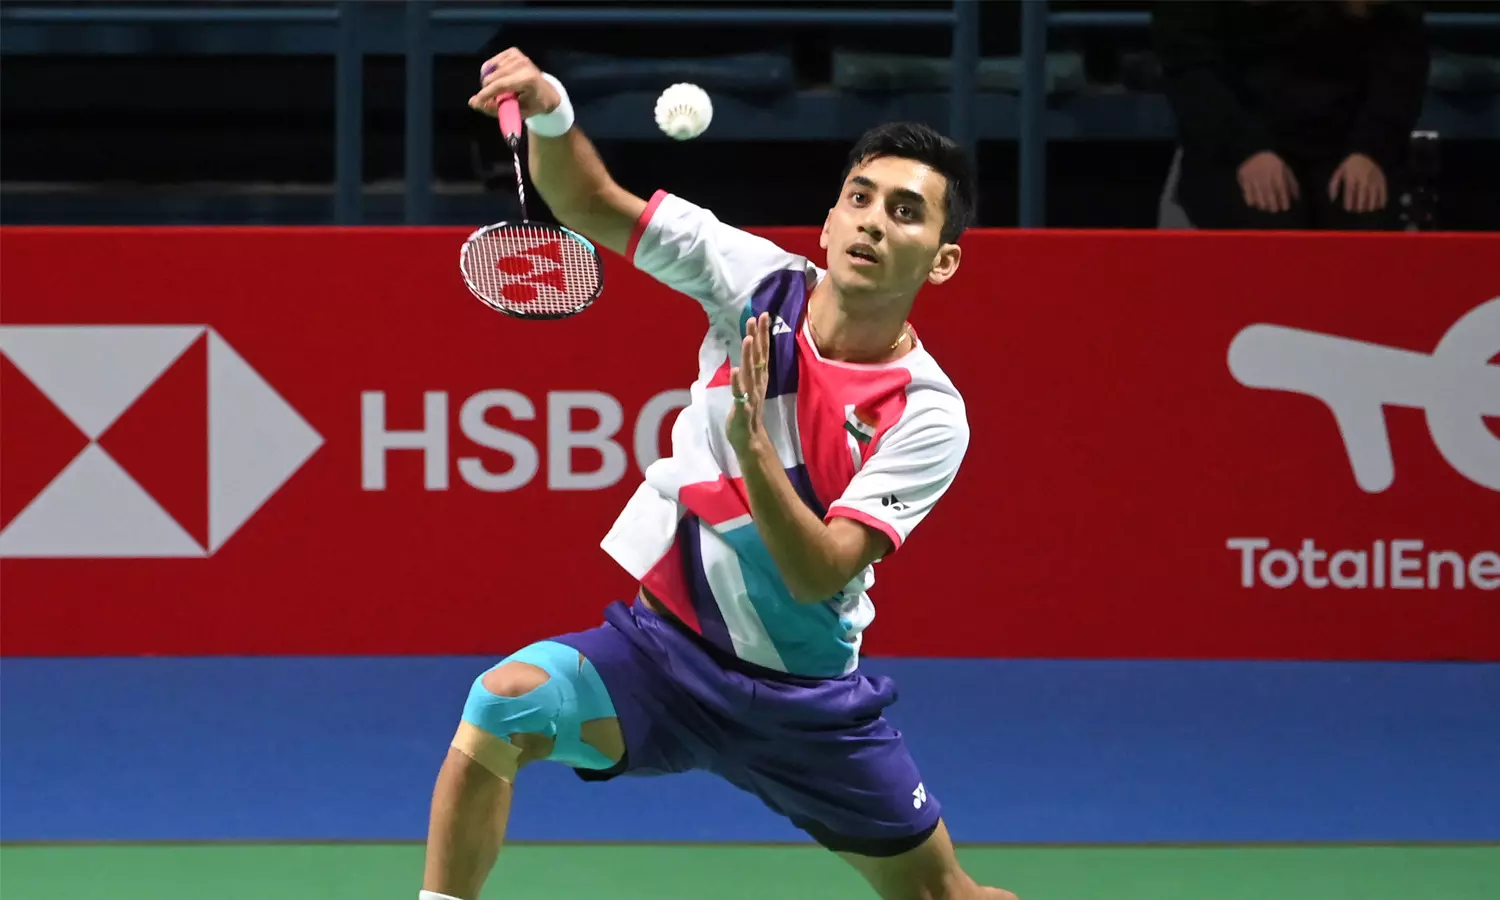 Lakshya Sen bagged the bronze medal in the previous edition of the tournament